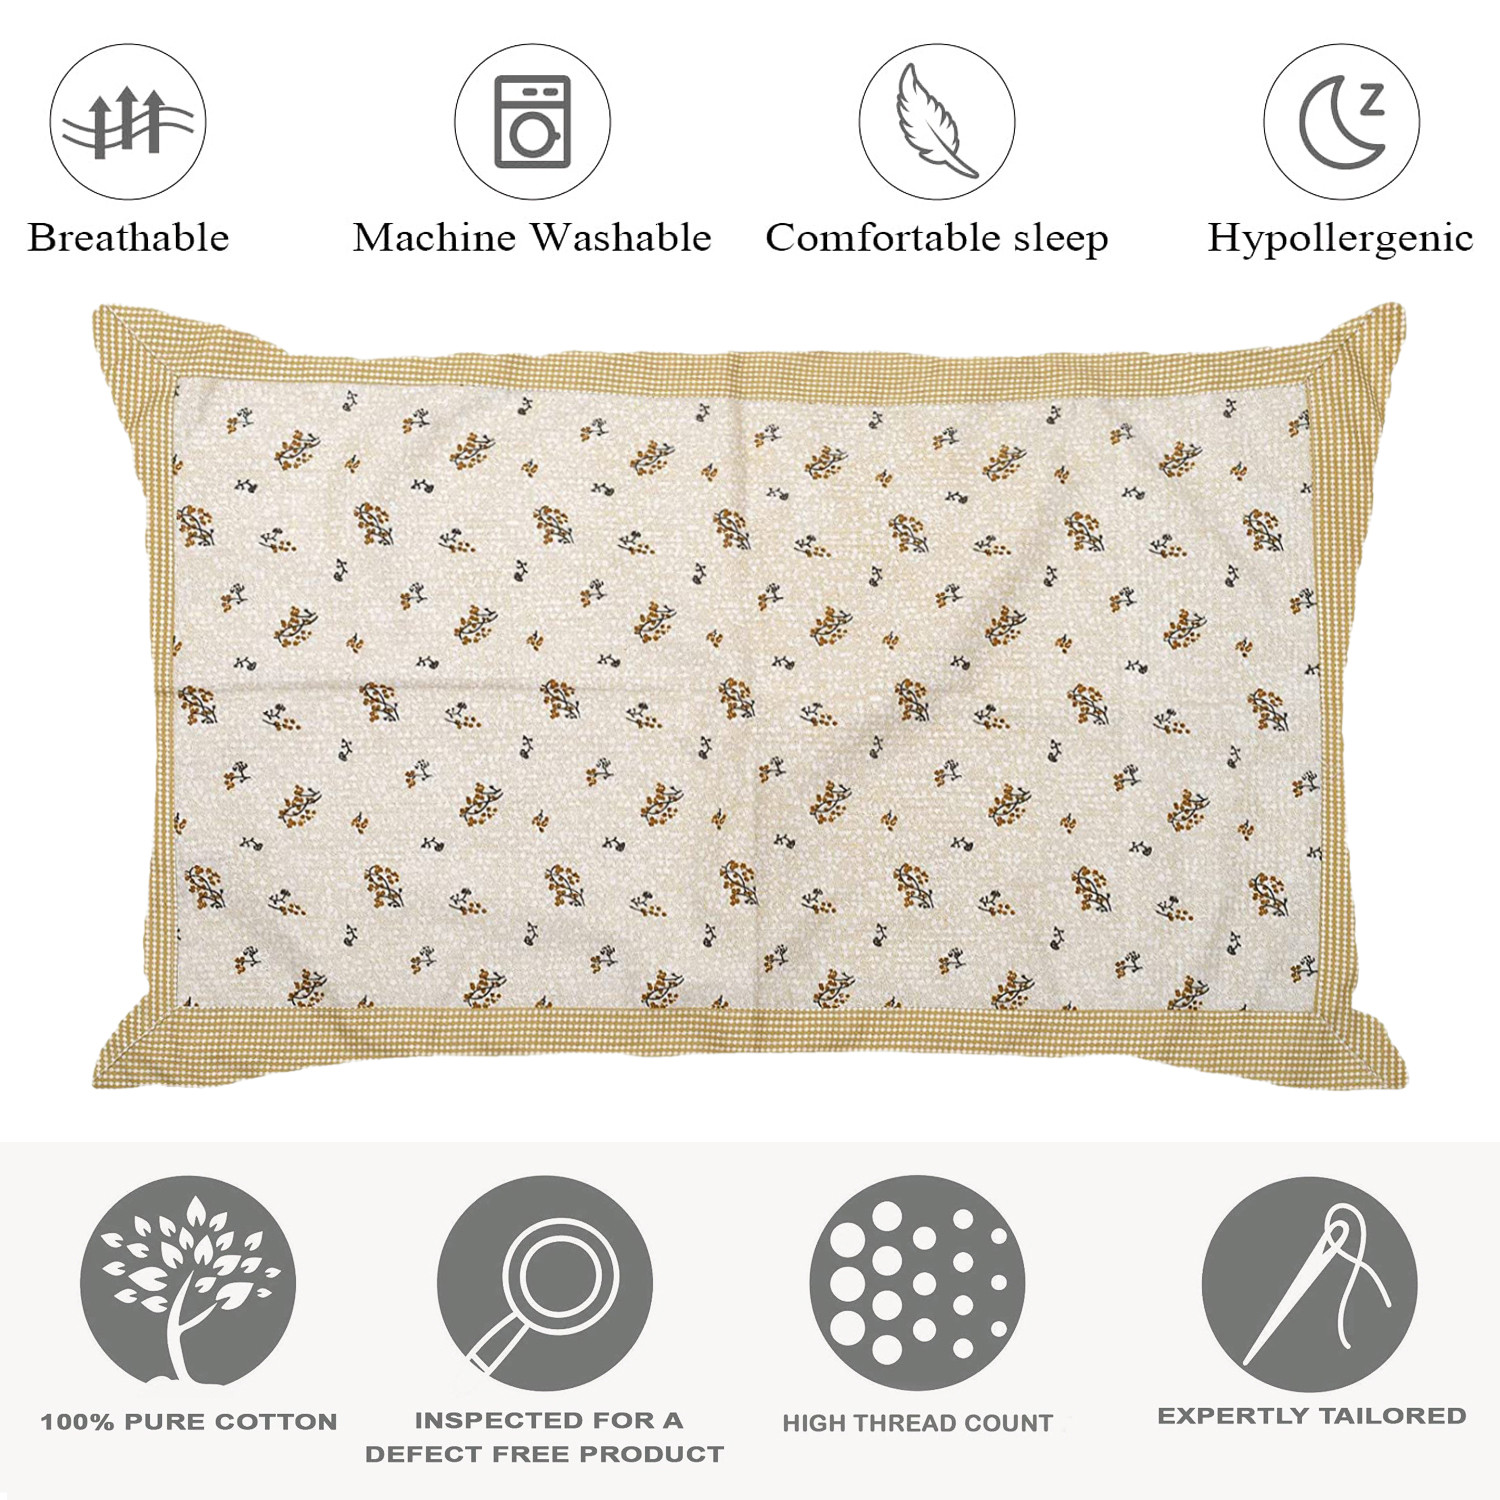 Kuber Industries Leaf Print Cotton Pillow Cover- 17x27 Inch,(Beige)